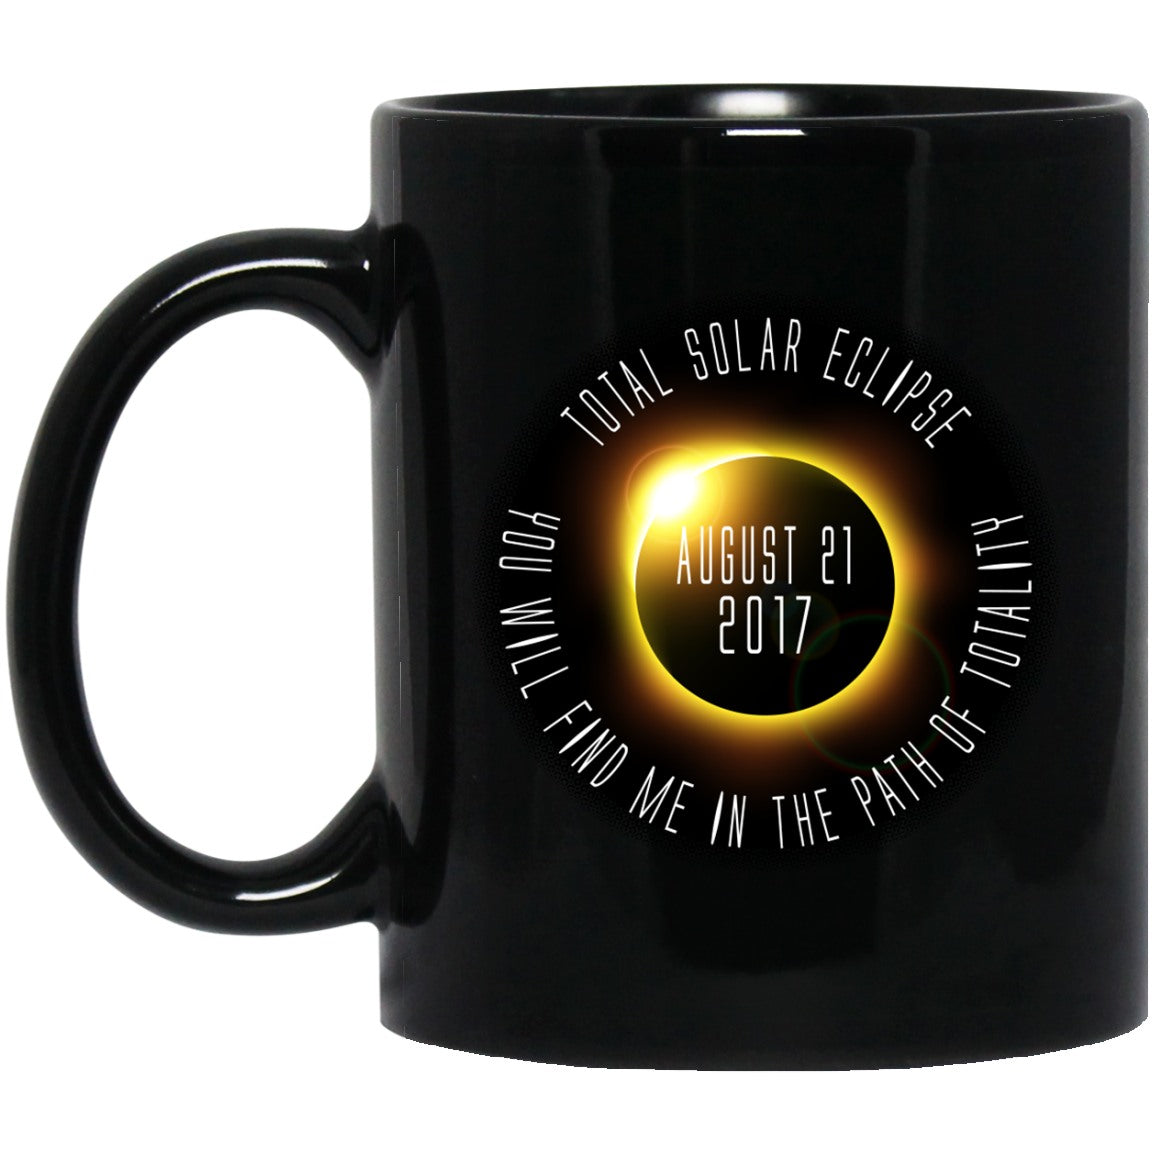 Total Solar Eclipse Coffee Mug - You Will Find Me In The Path Of Totality - GoneBold.gift